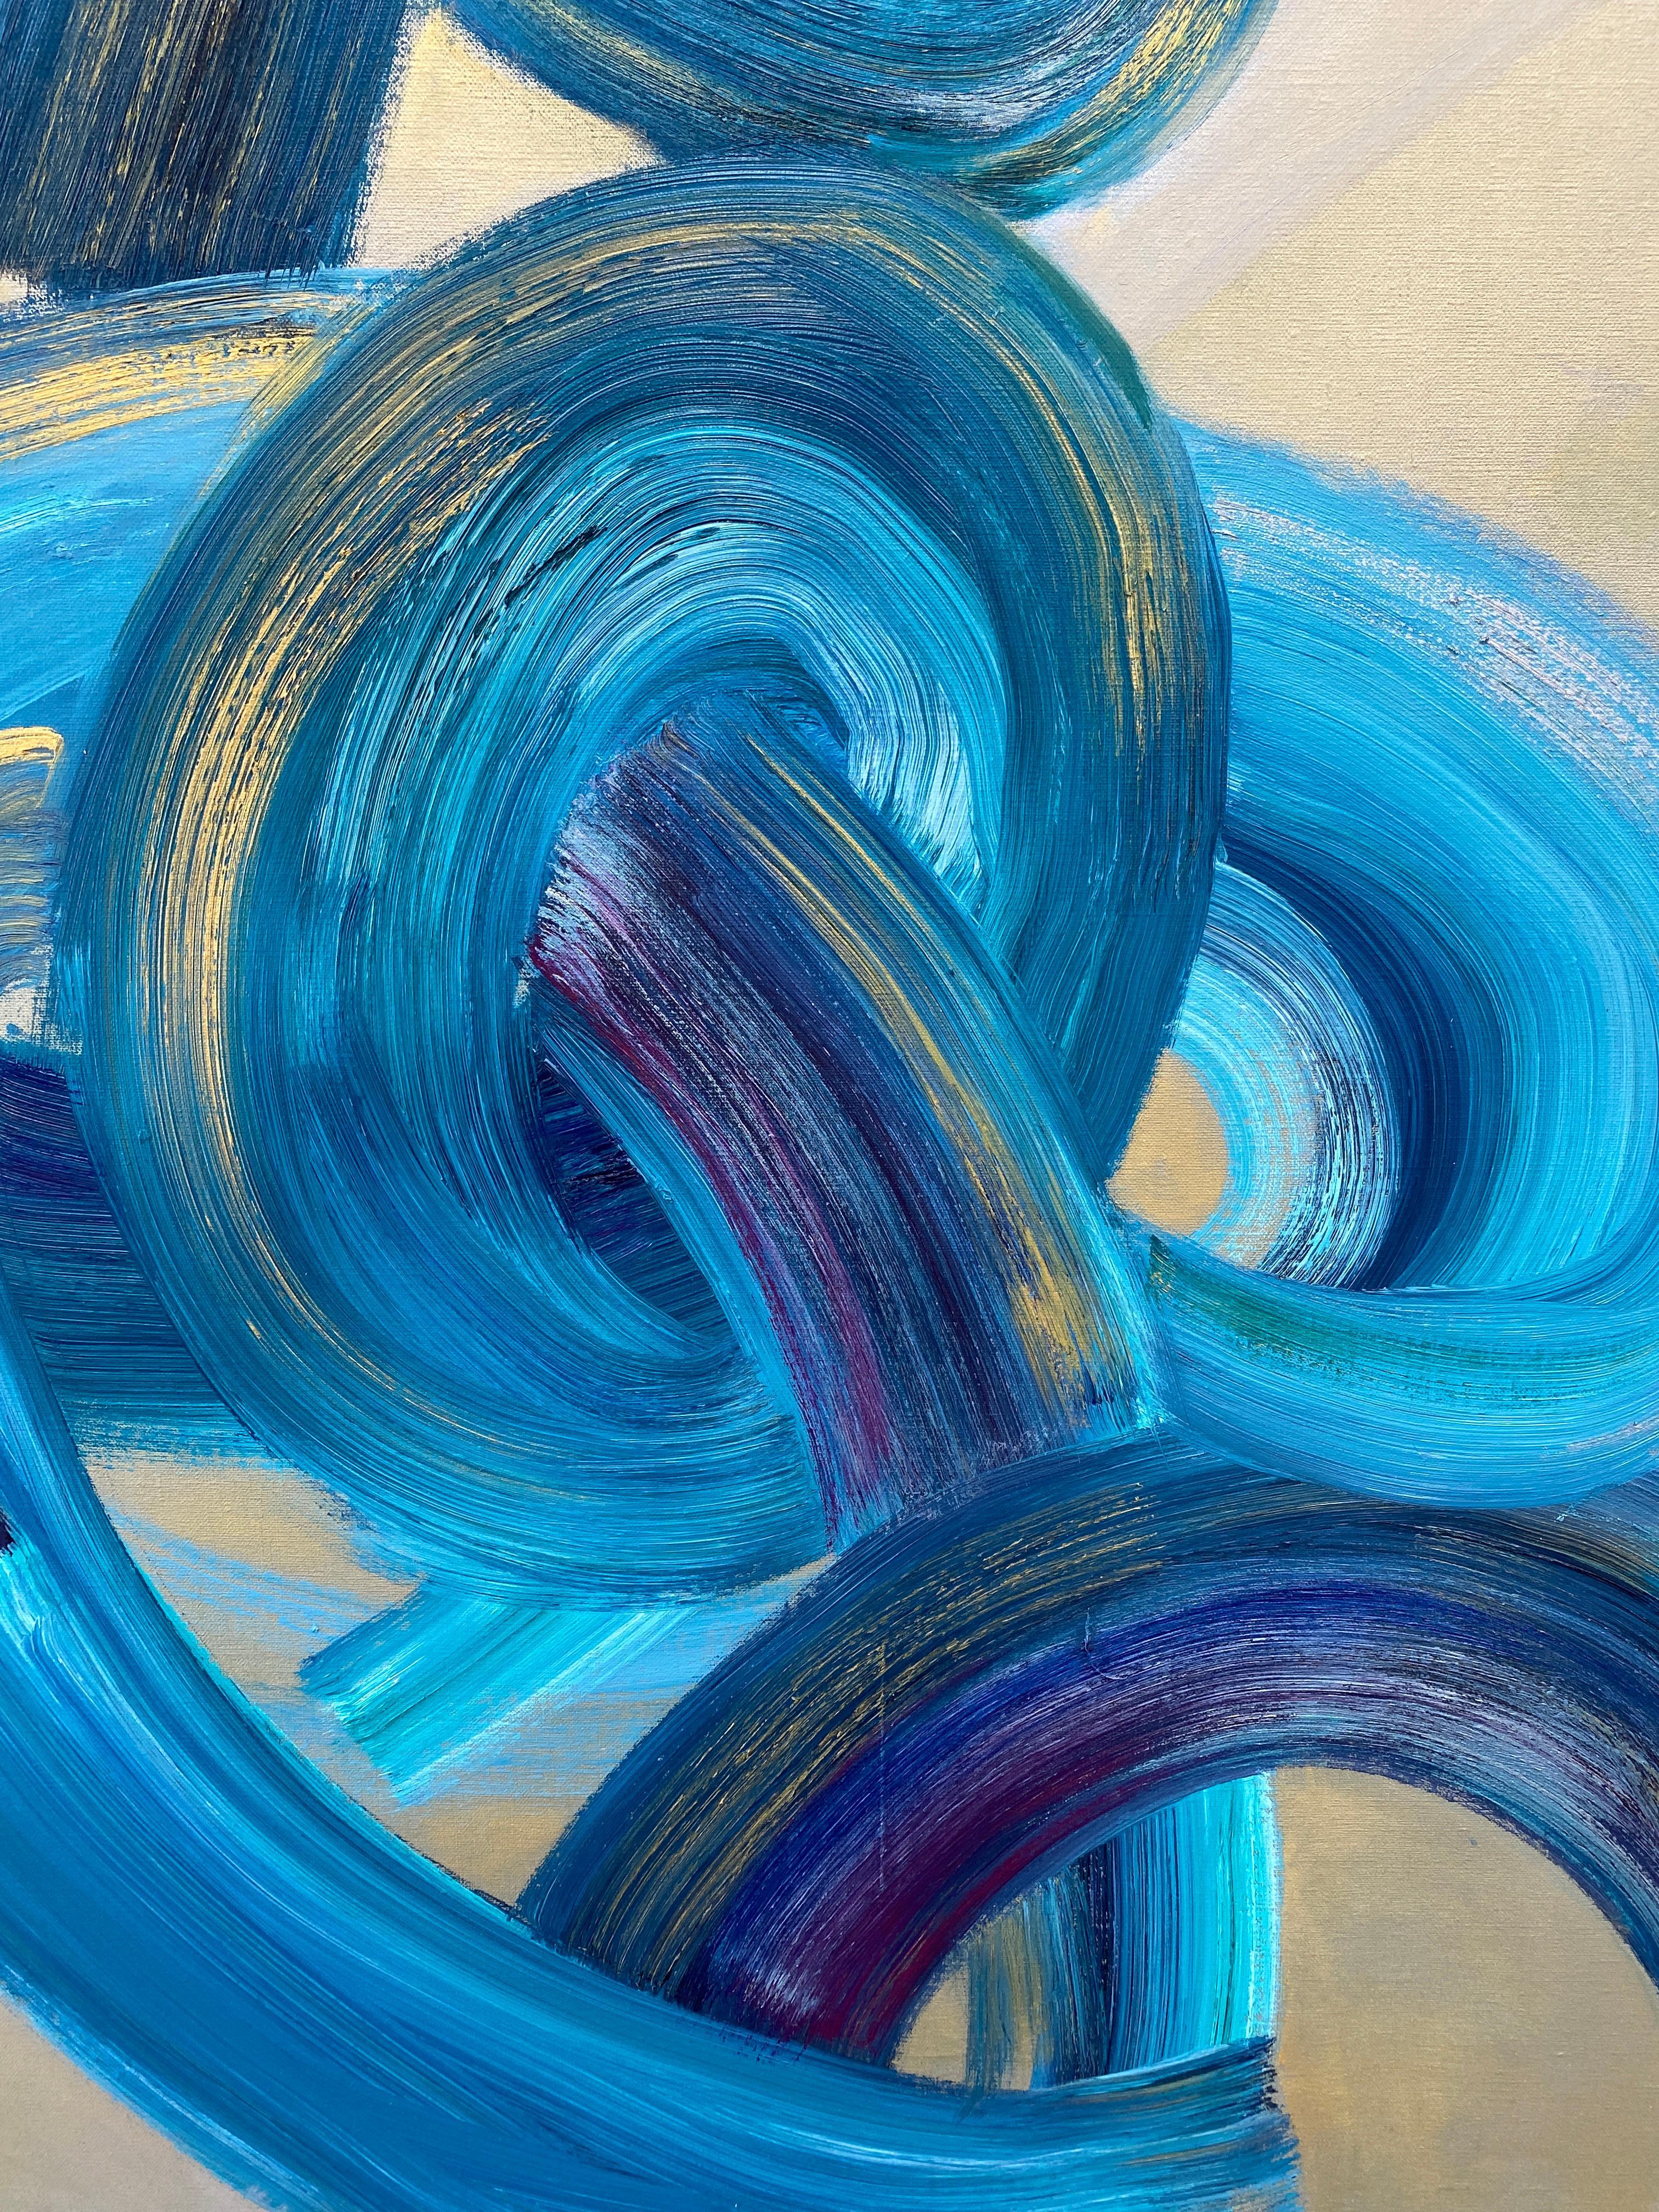 A 2019 contemporary abstract oil painting by Sydney Yeager measuring 54 inches tall and 36 inches wide. This work depicts large blue brushstrokes, intertwined, creating the illusion of depth. Yeager elegantly translates minute shifts in light, the